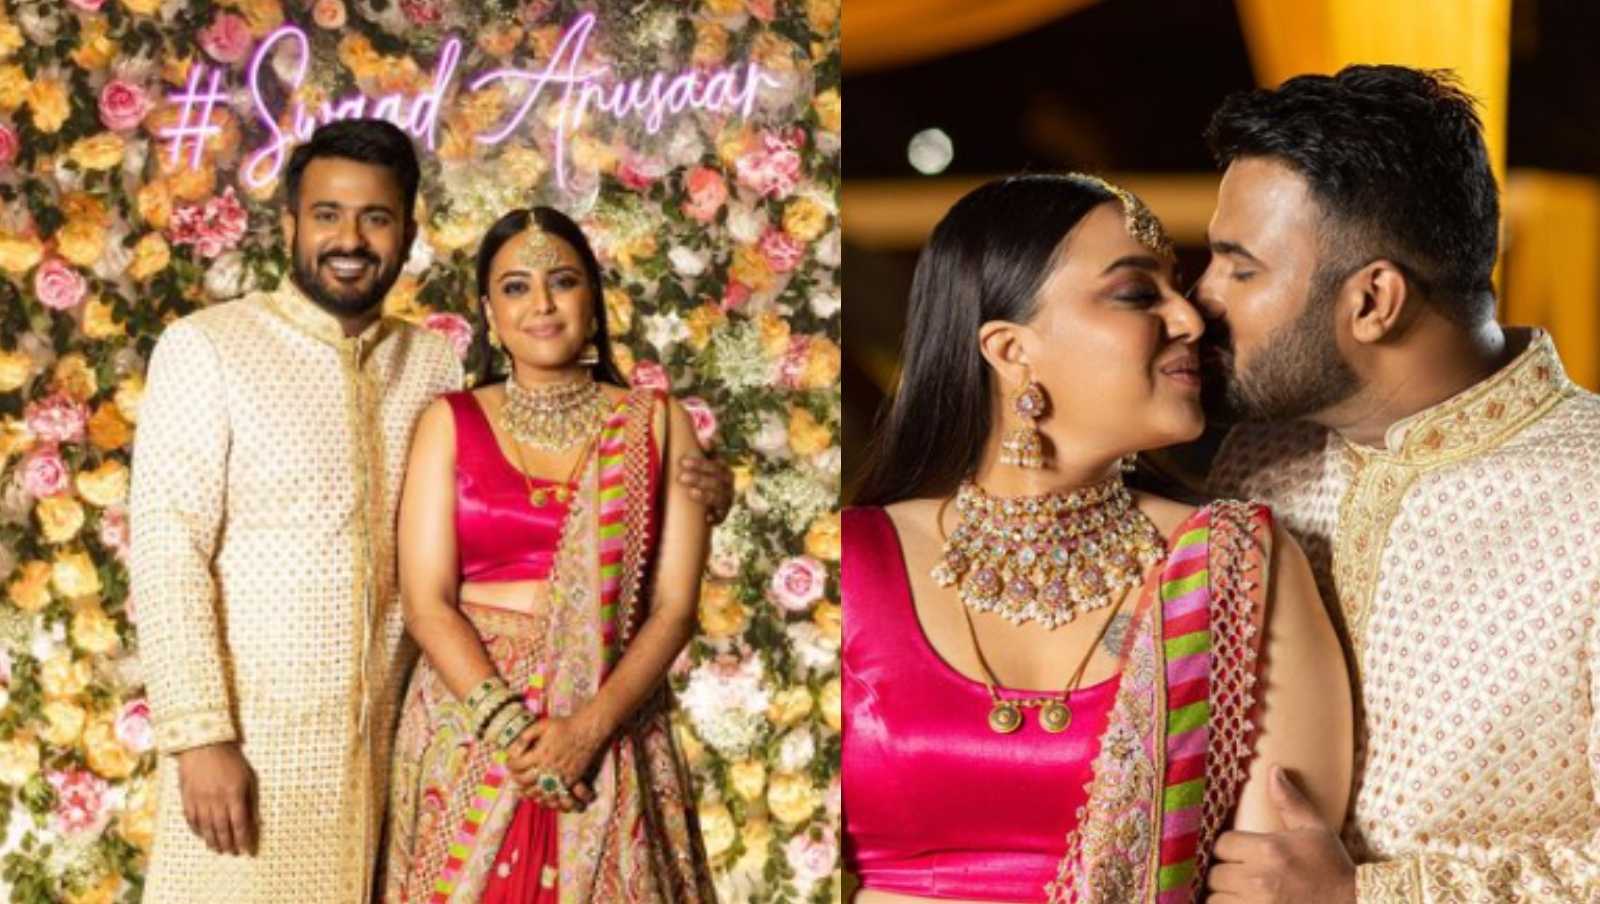 Swara Bhasker gets a sweet peck on the cheeks by hubby Fahad Ahmad in their dreamy reception pictures, seen it yet?